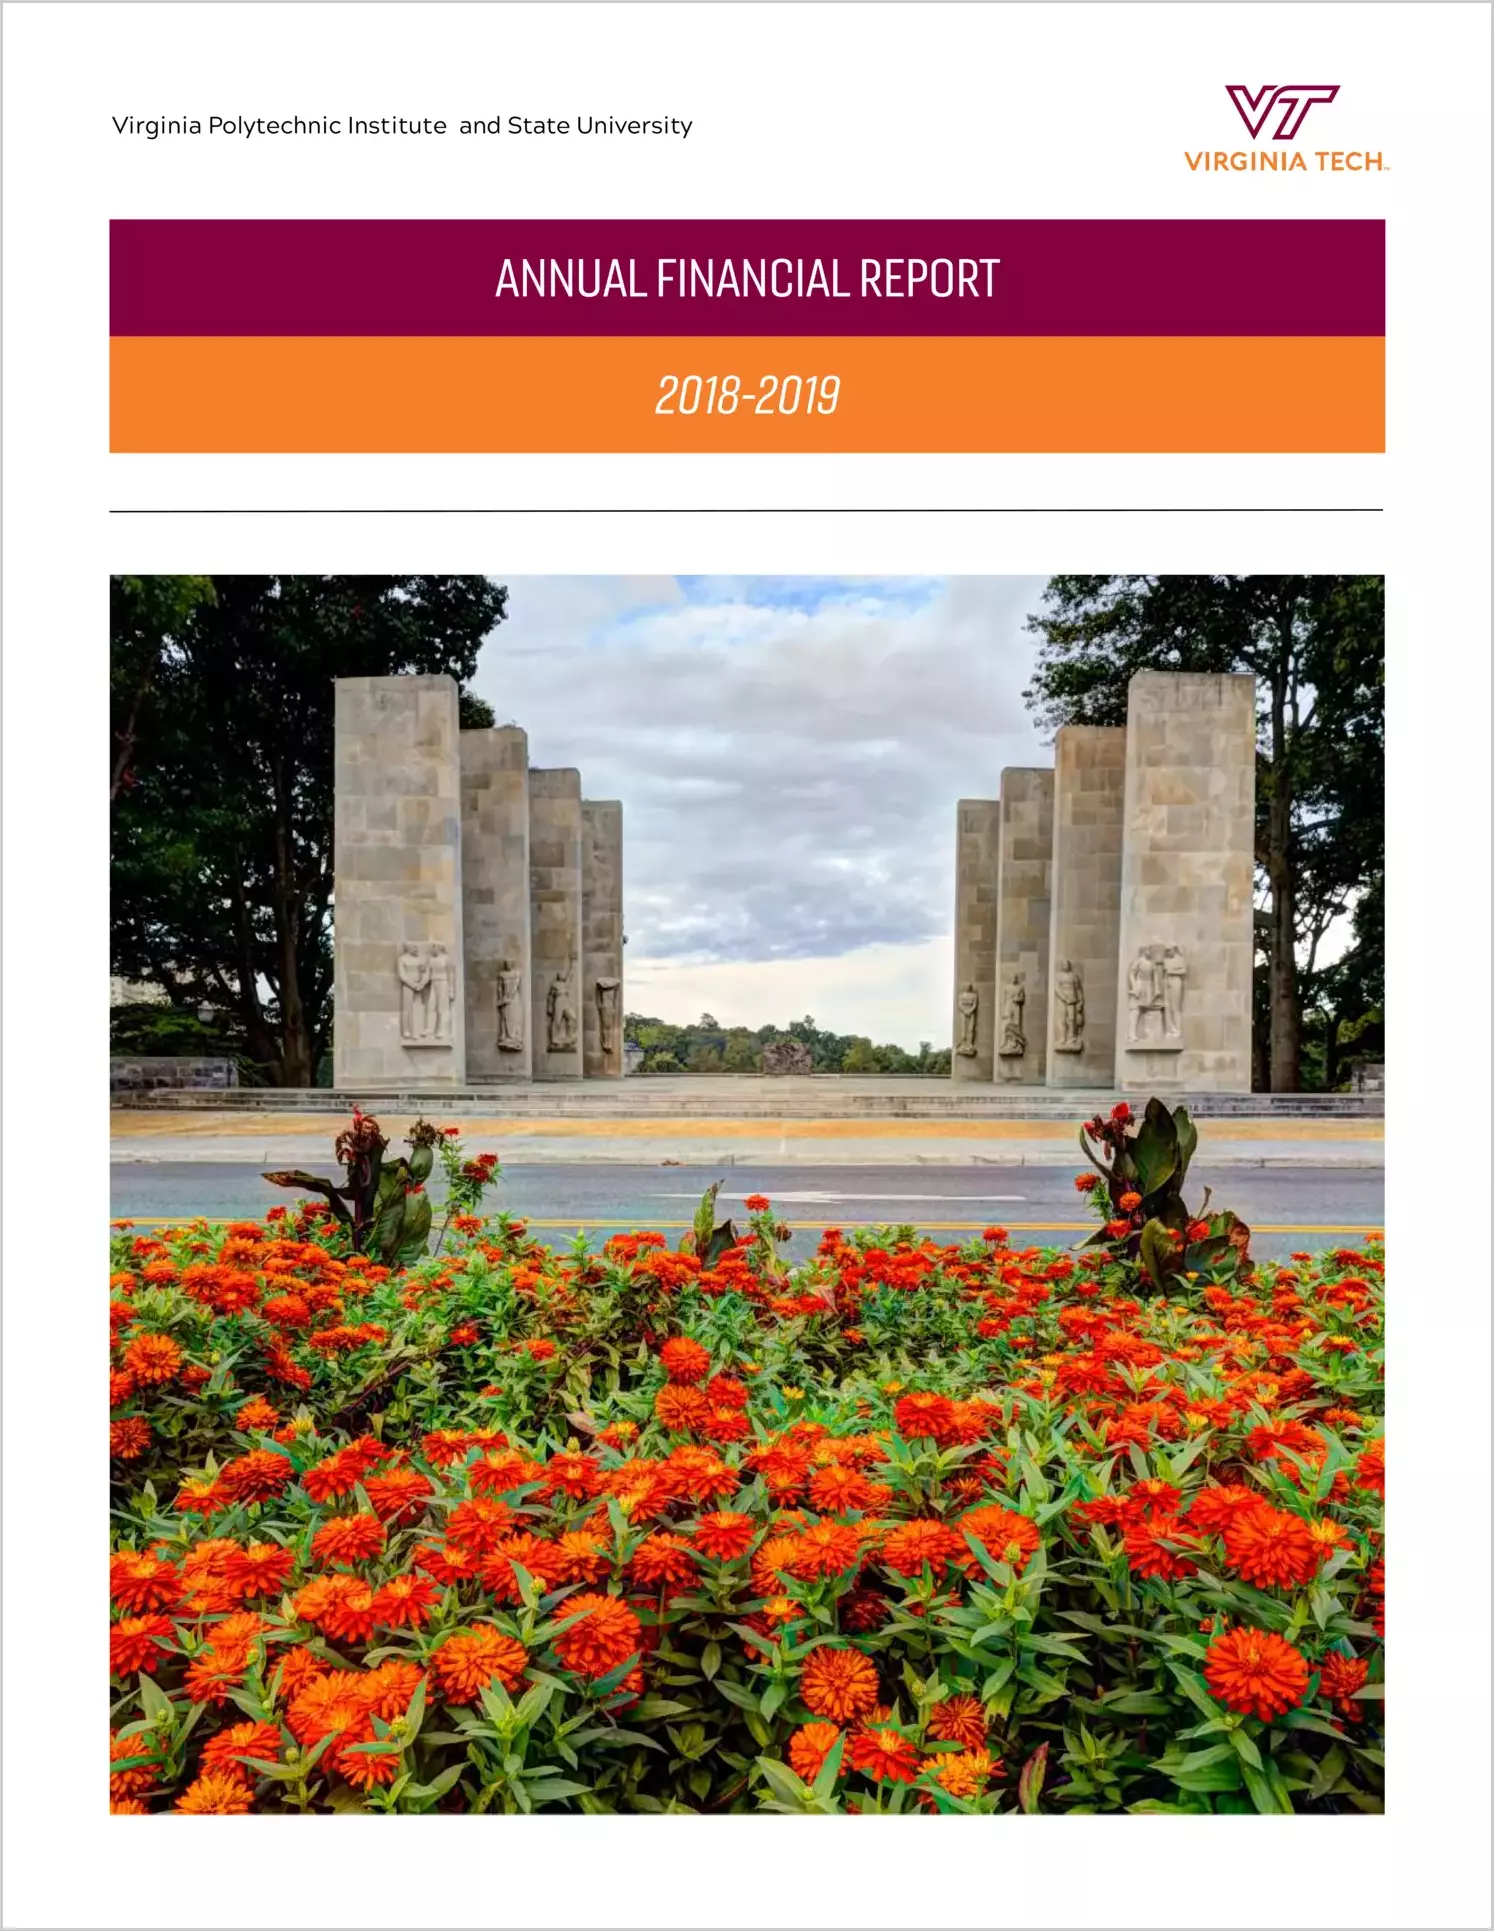 Virginia Polytechnic Institute and State University Financial Statements for the year ended June 30, 2019